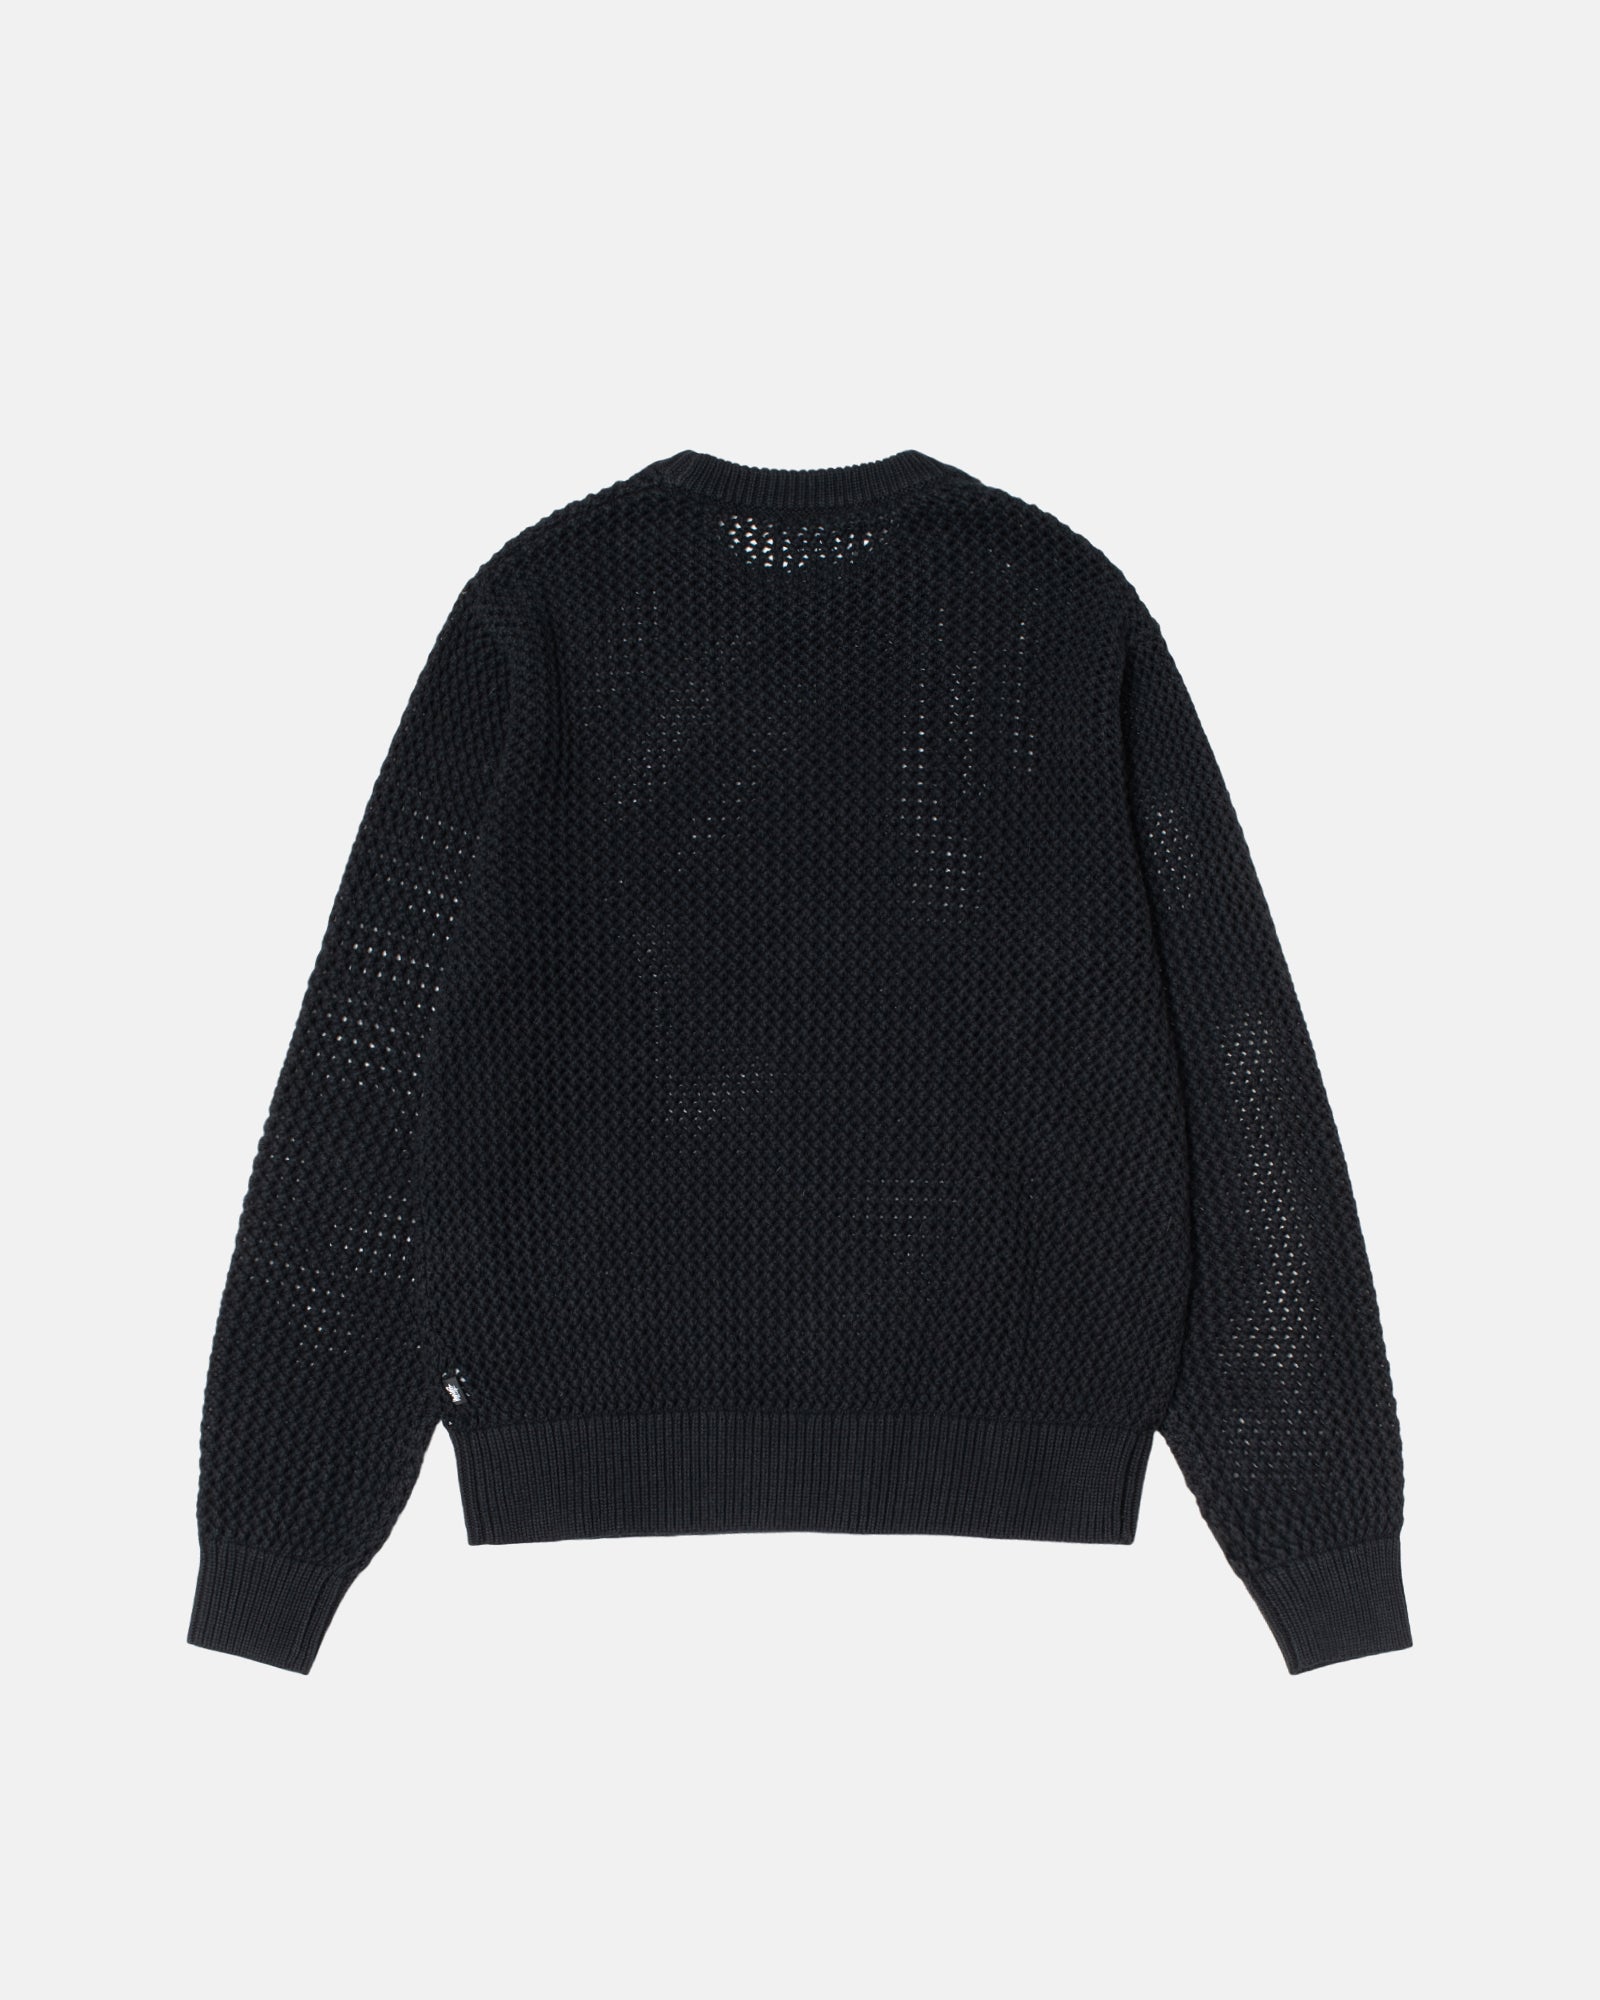 Pigment Dyed Loose Gauge Knit Sweater - Men's Sweaters | Stüssy